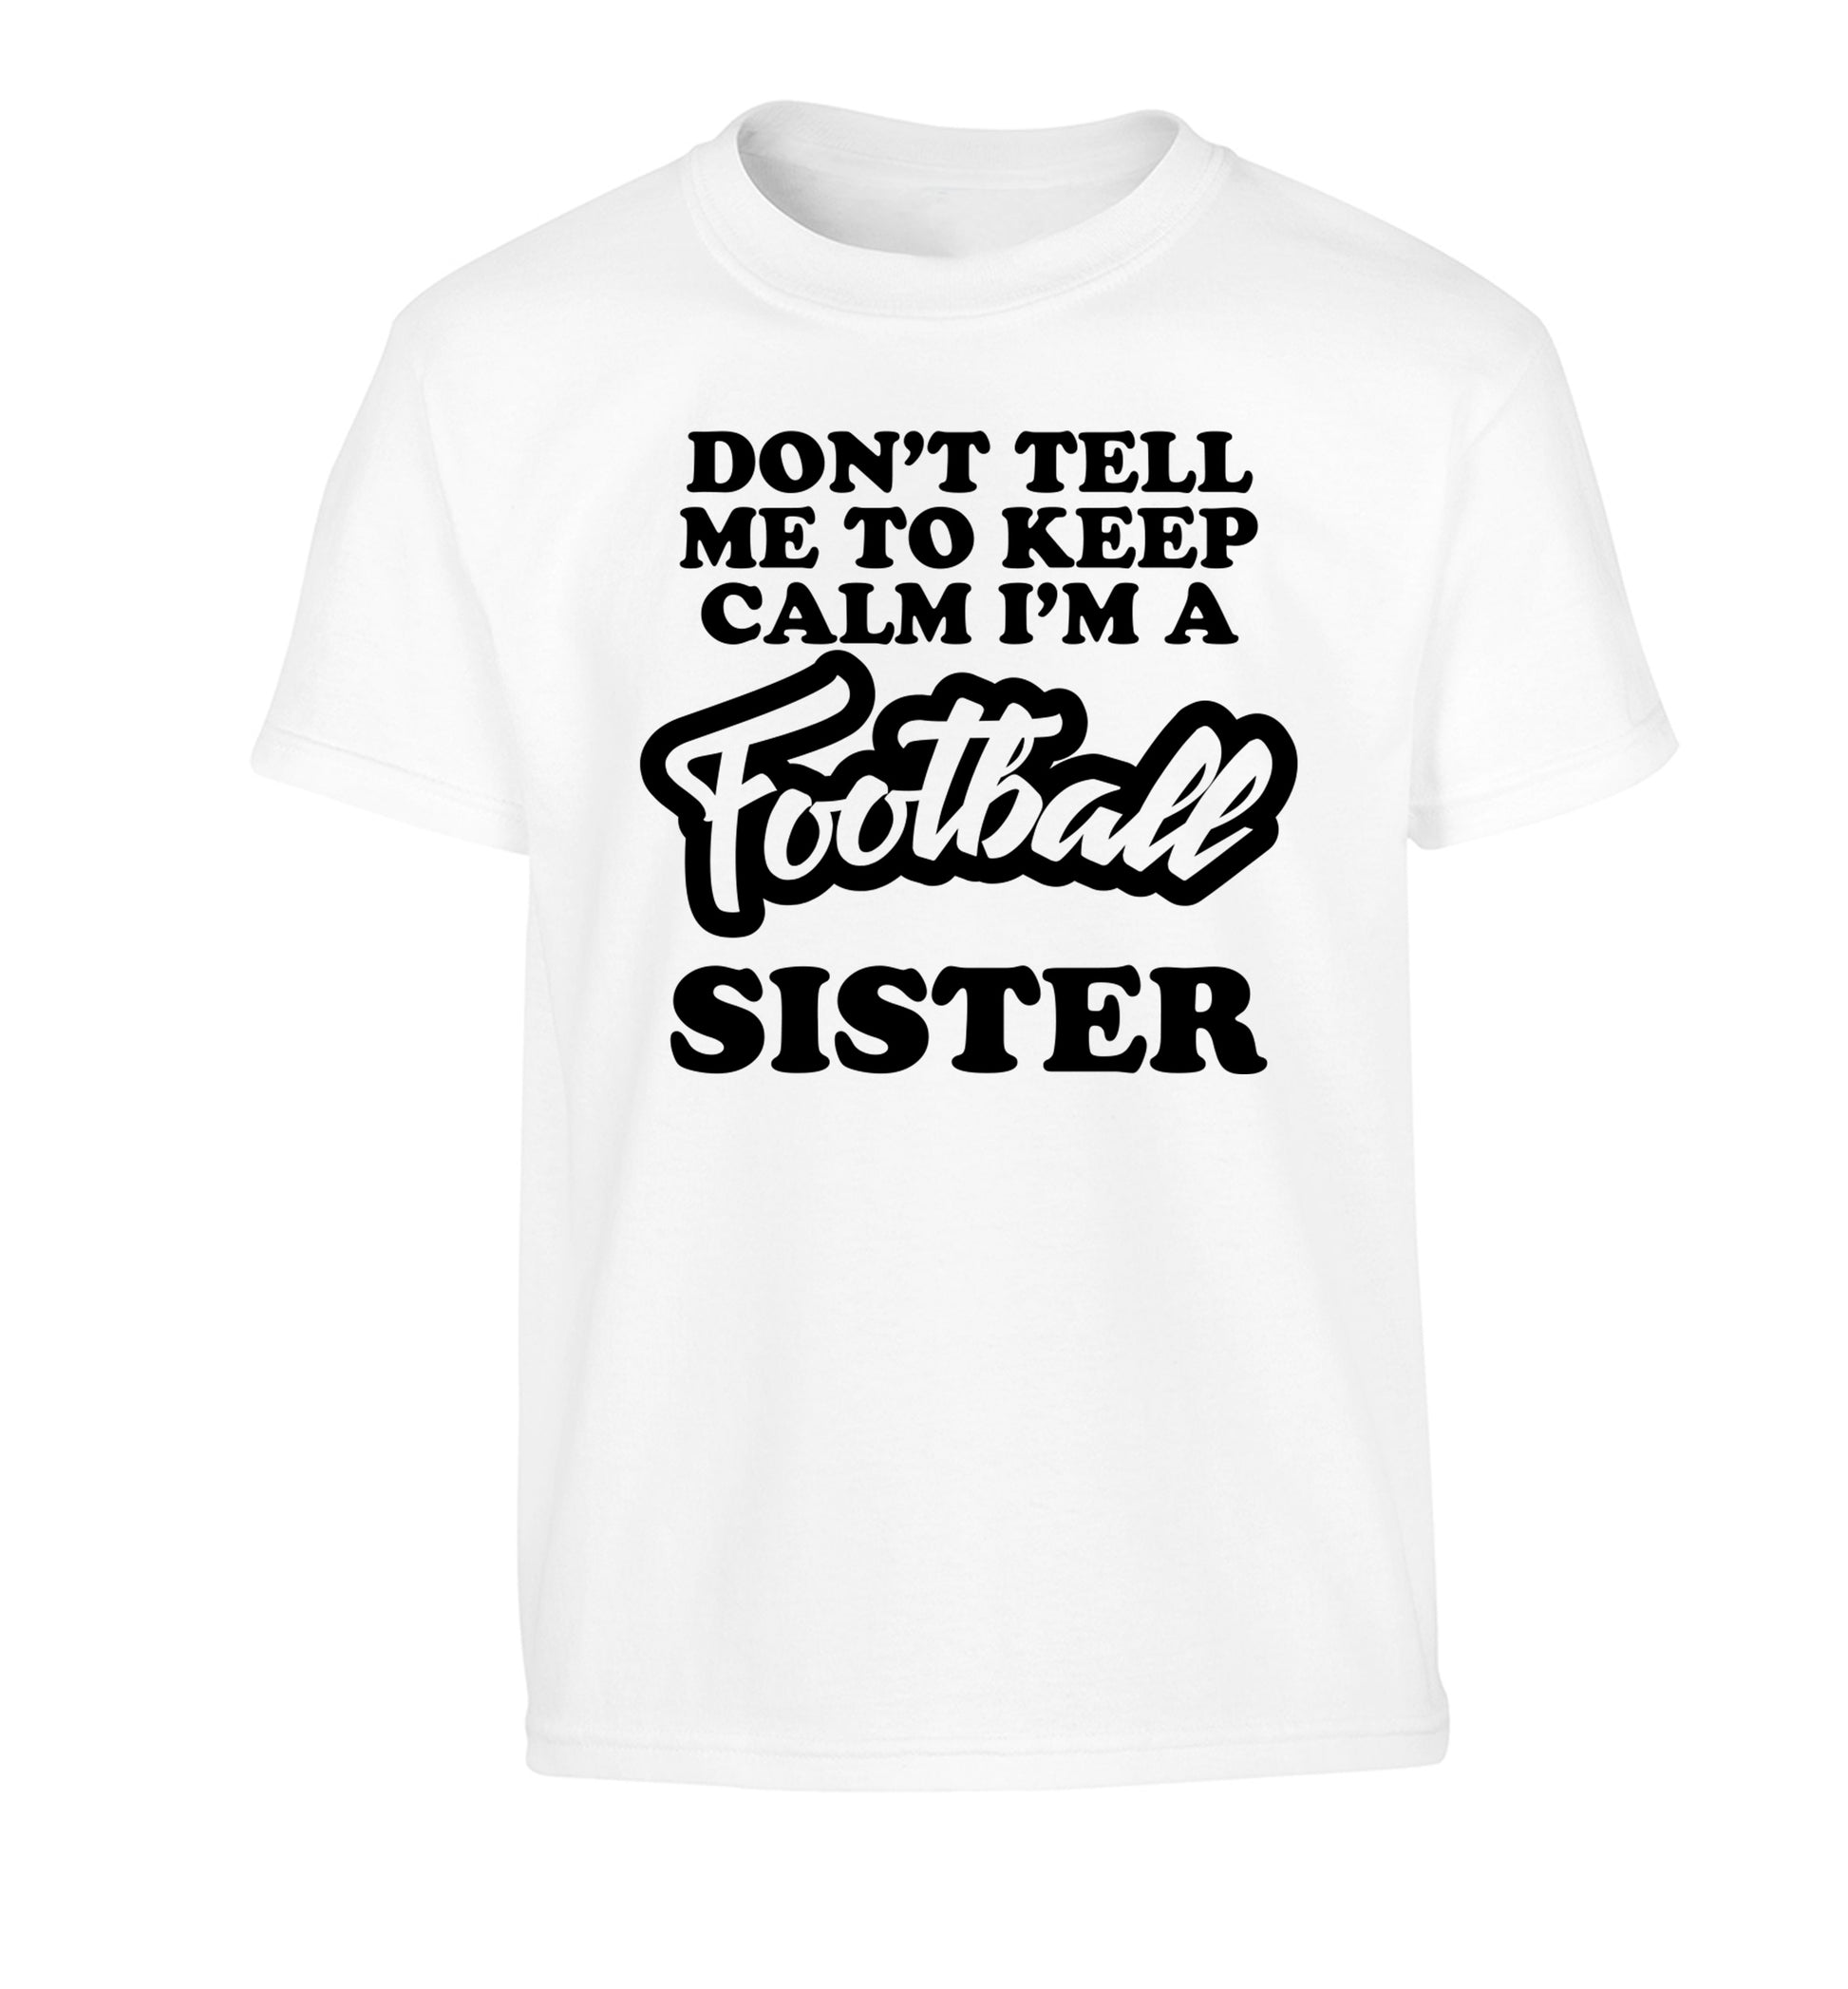 Don't tell me to keep calm I'm a football sister Children's white Tshirt 12-14 Years